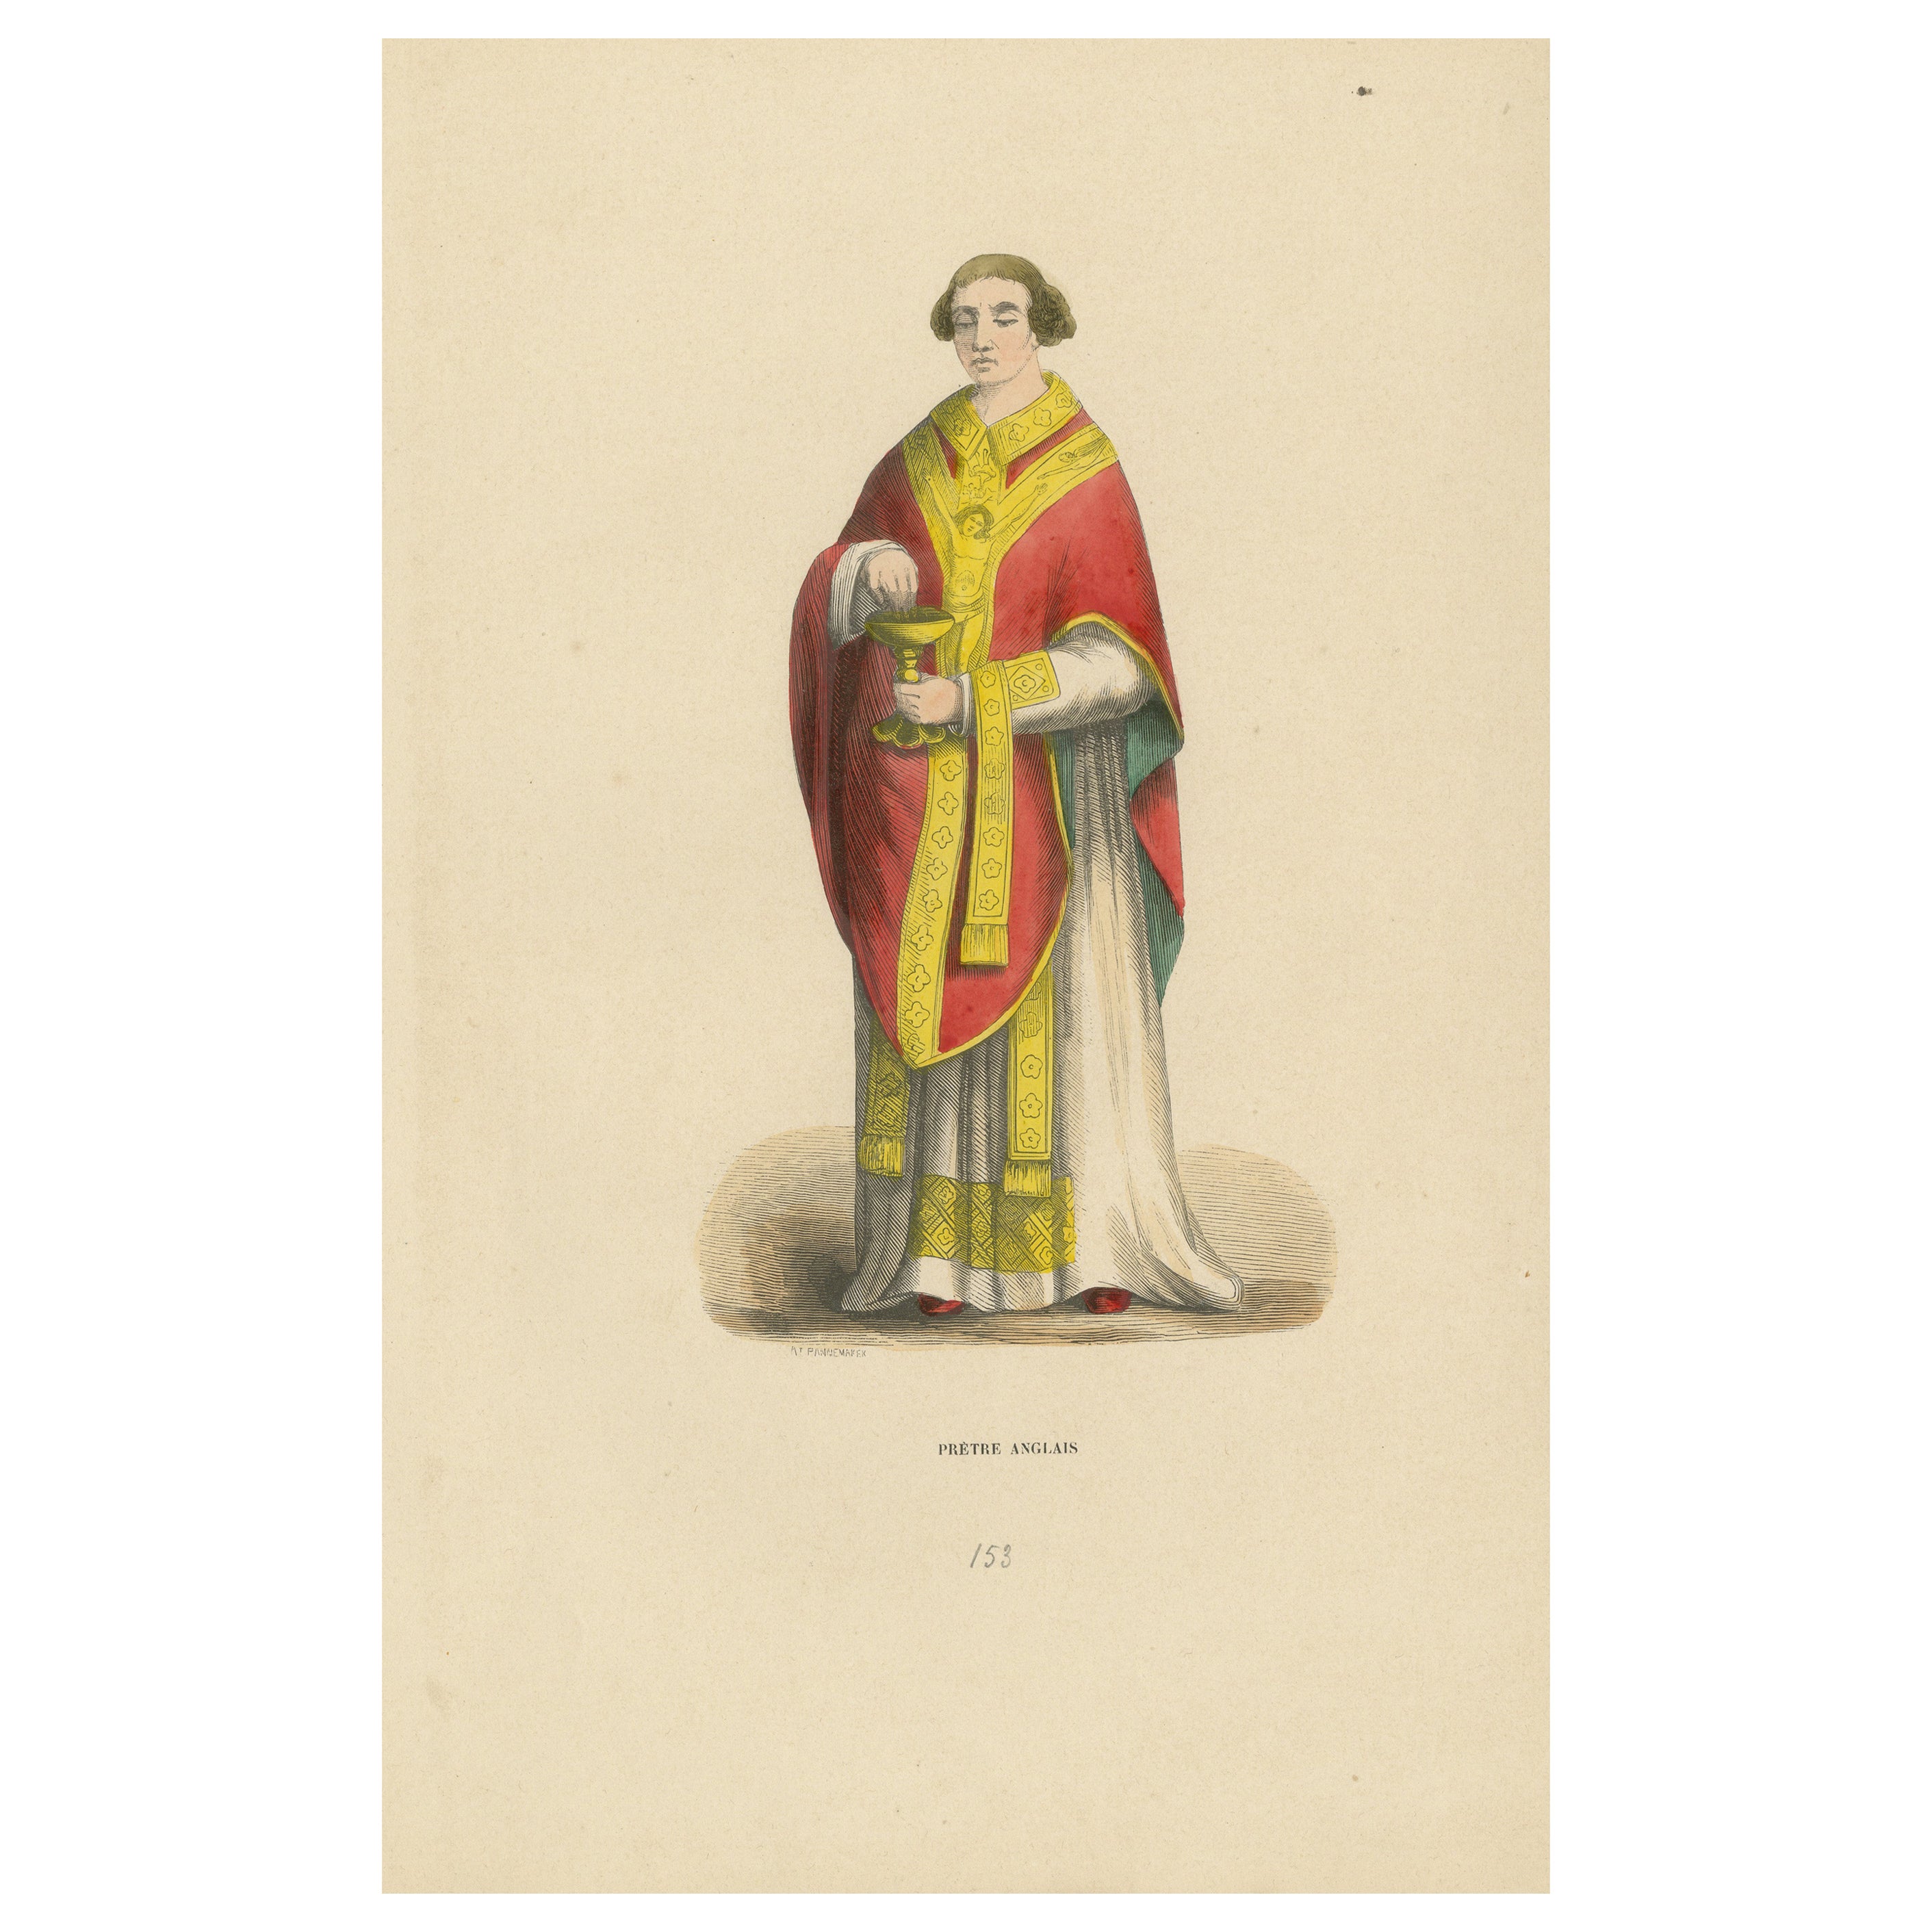 Clerical Dignity: An English Priest in 'Costume du Moyen Âge', 1847 For Sale